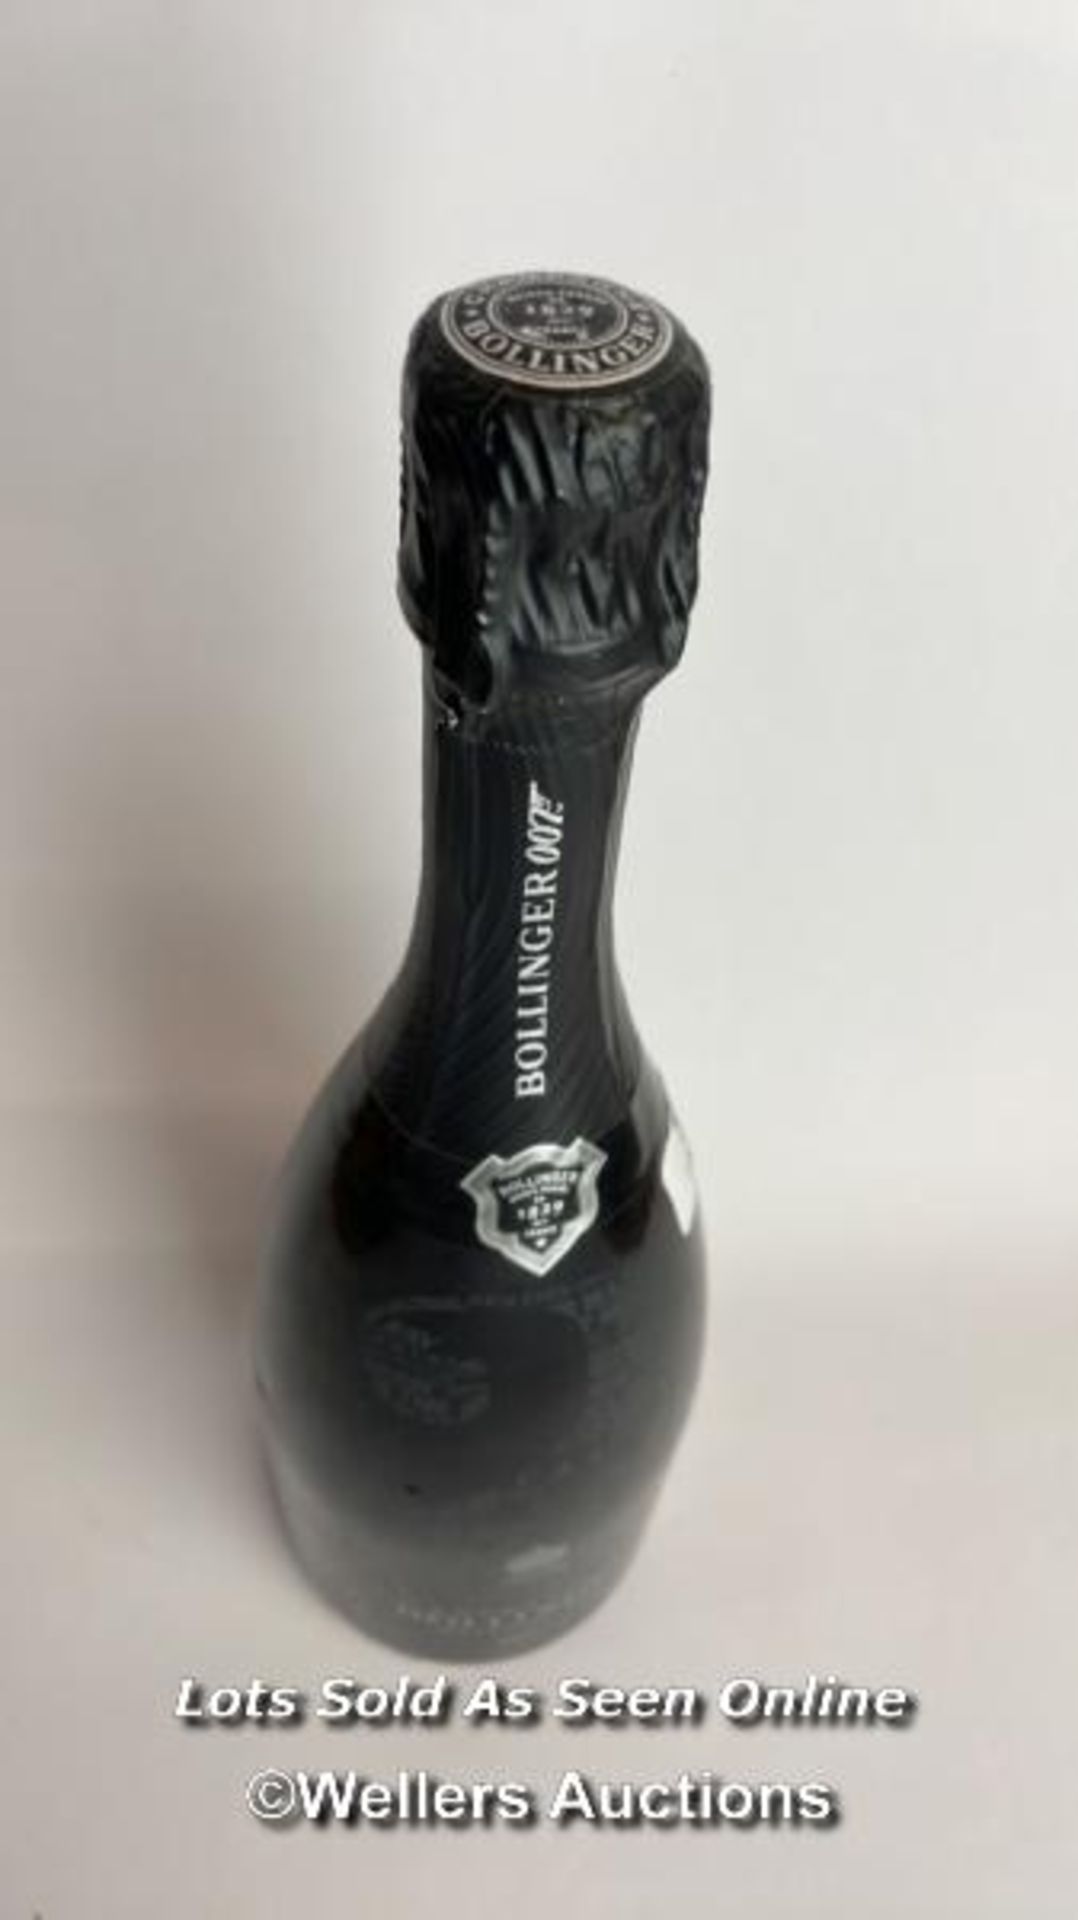 2011 007 Bollinger Champagne, Millesime, 75cl, 12% vol / Please see images for fill level and - Image 5 of 8